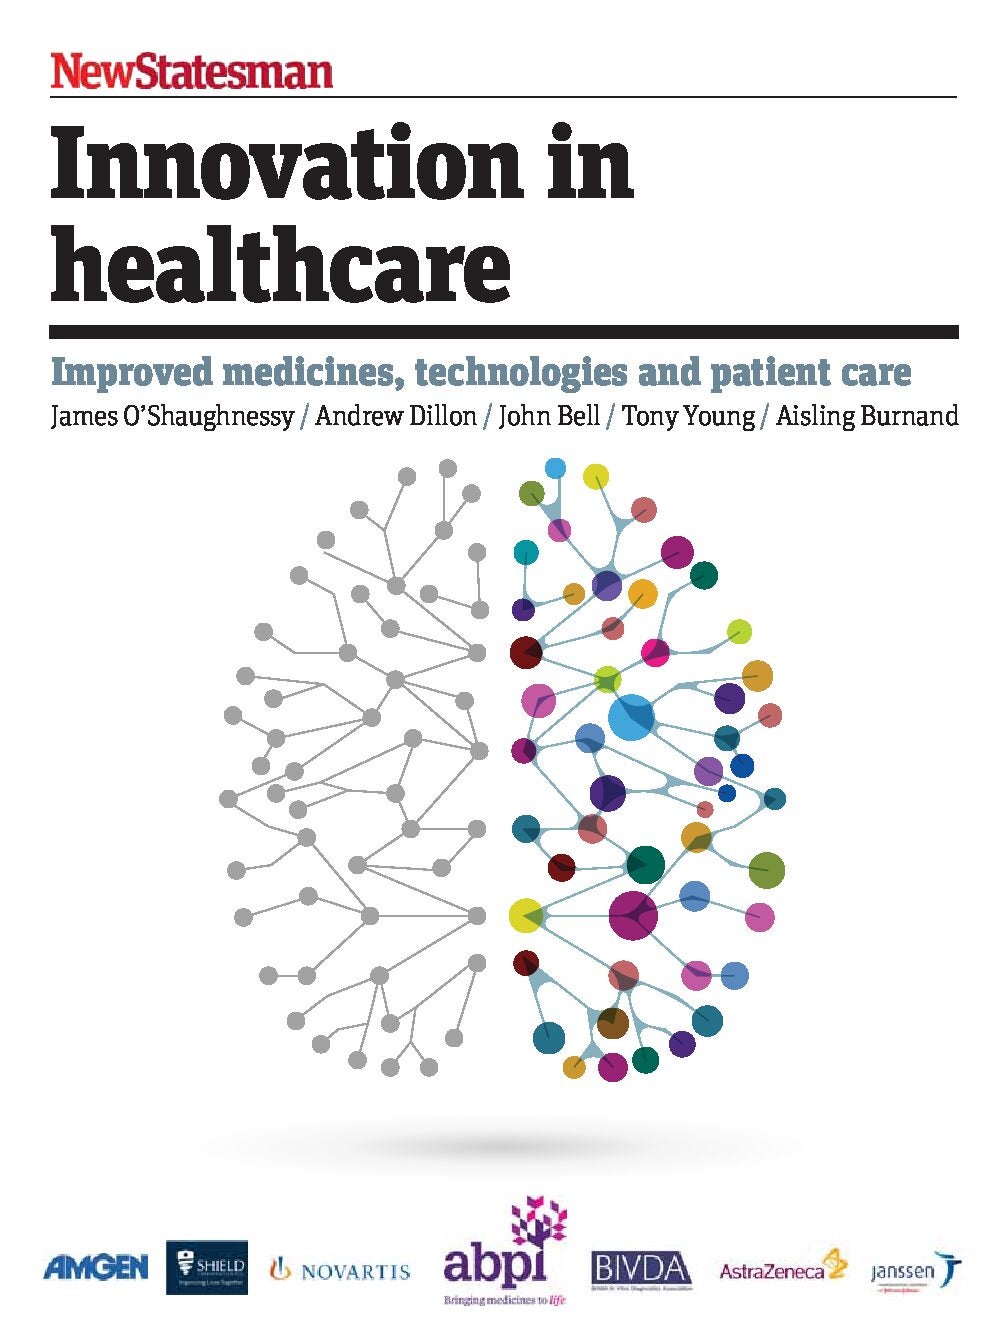 Innovation in healthcare: Improved medicines, technologies and patient care